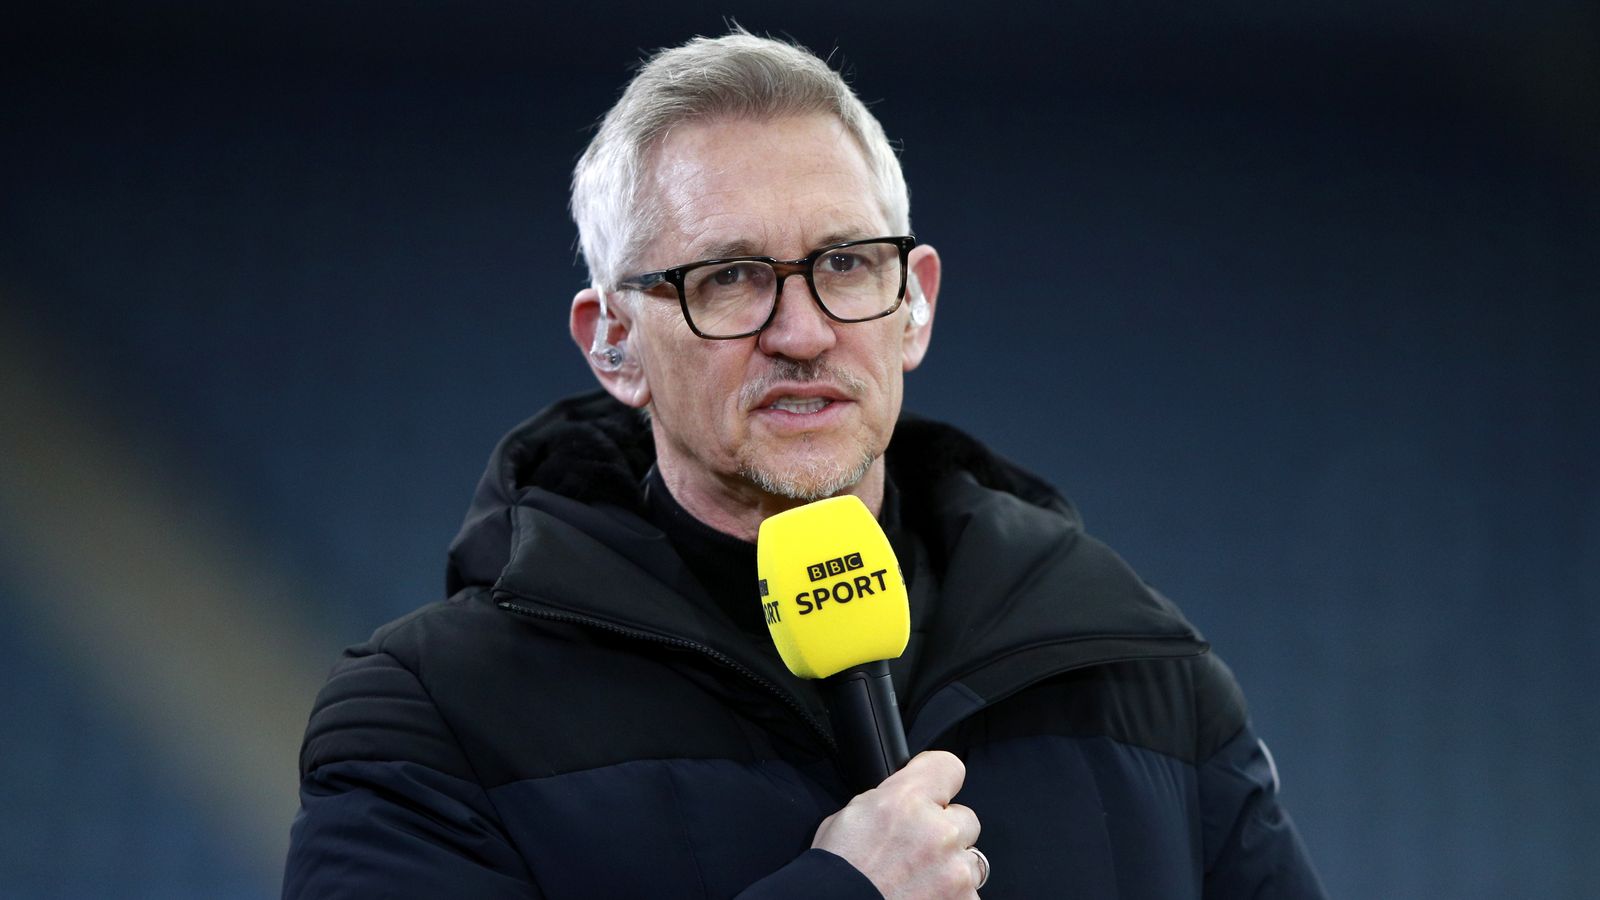 Gary Lineker jokes about 'quiet' week in first TV appearance since BBC impartiality row